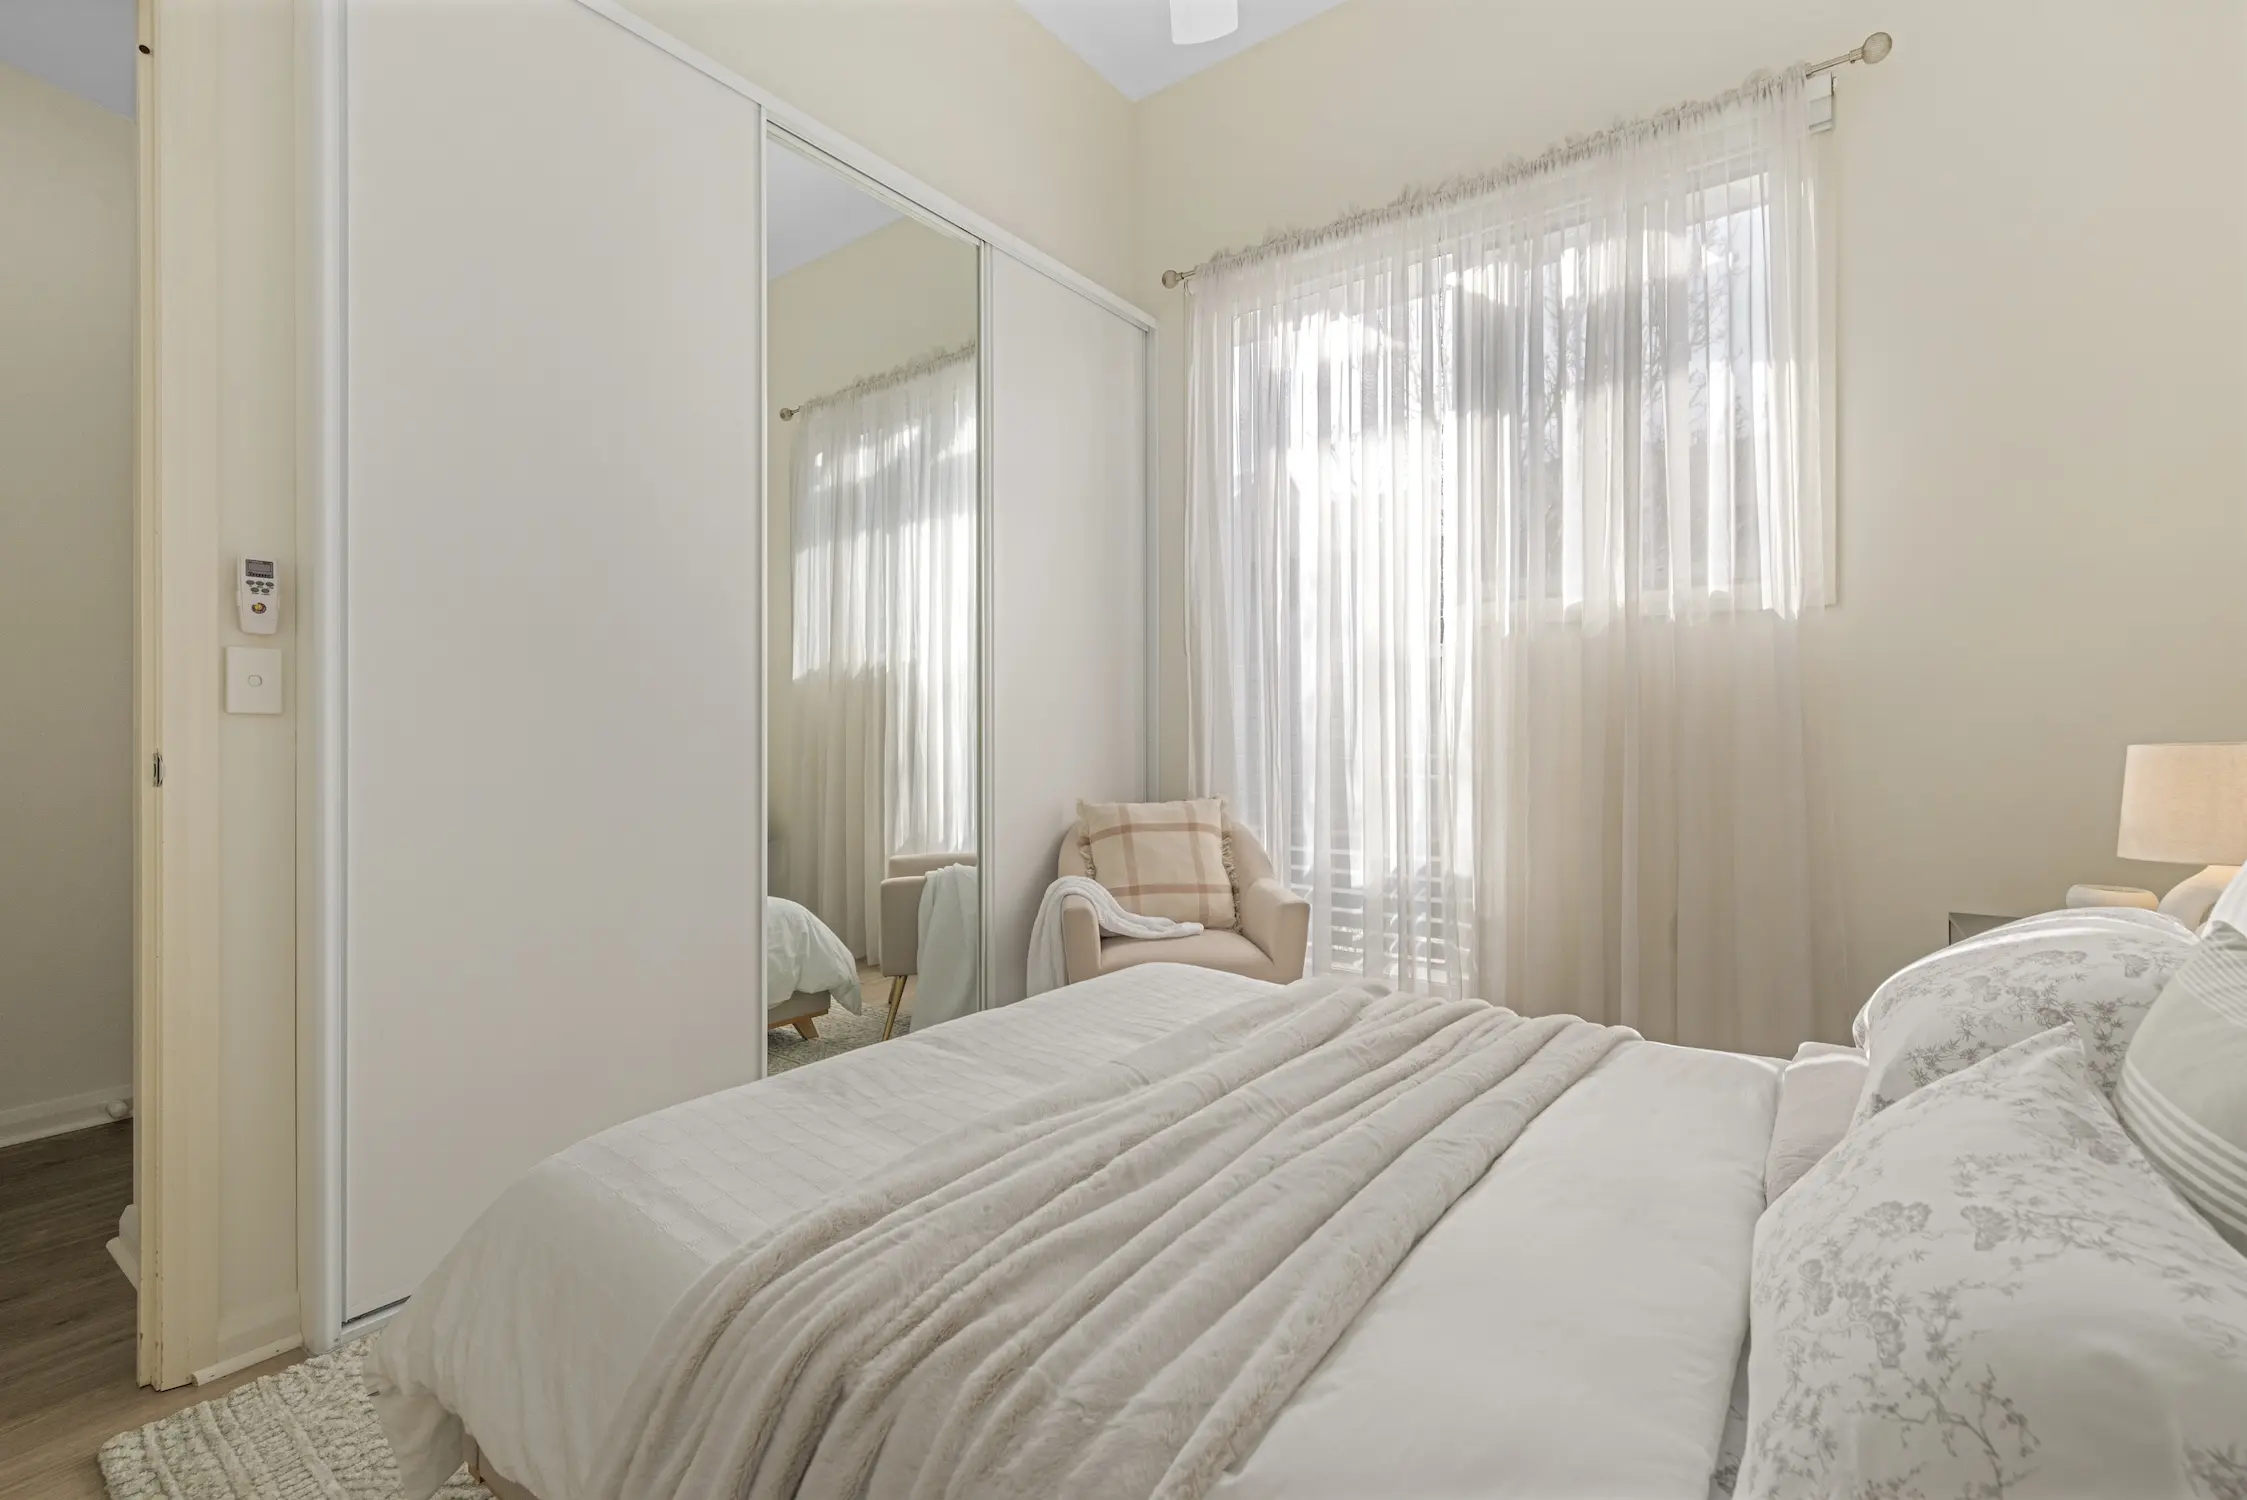 A white bedroom styled by Amor Home Styling.